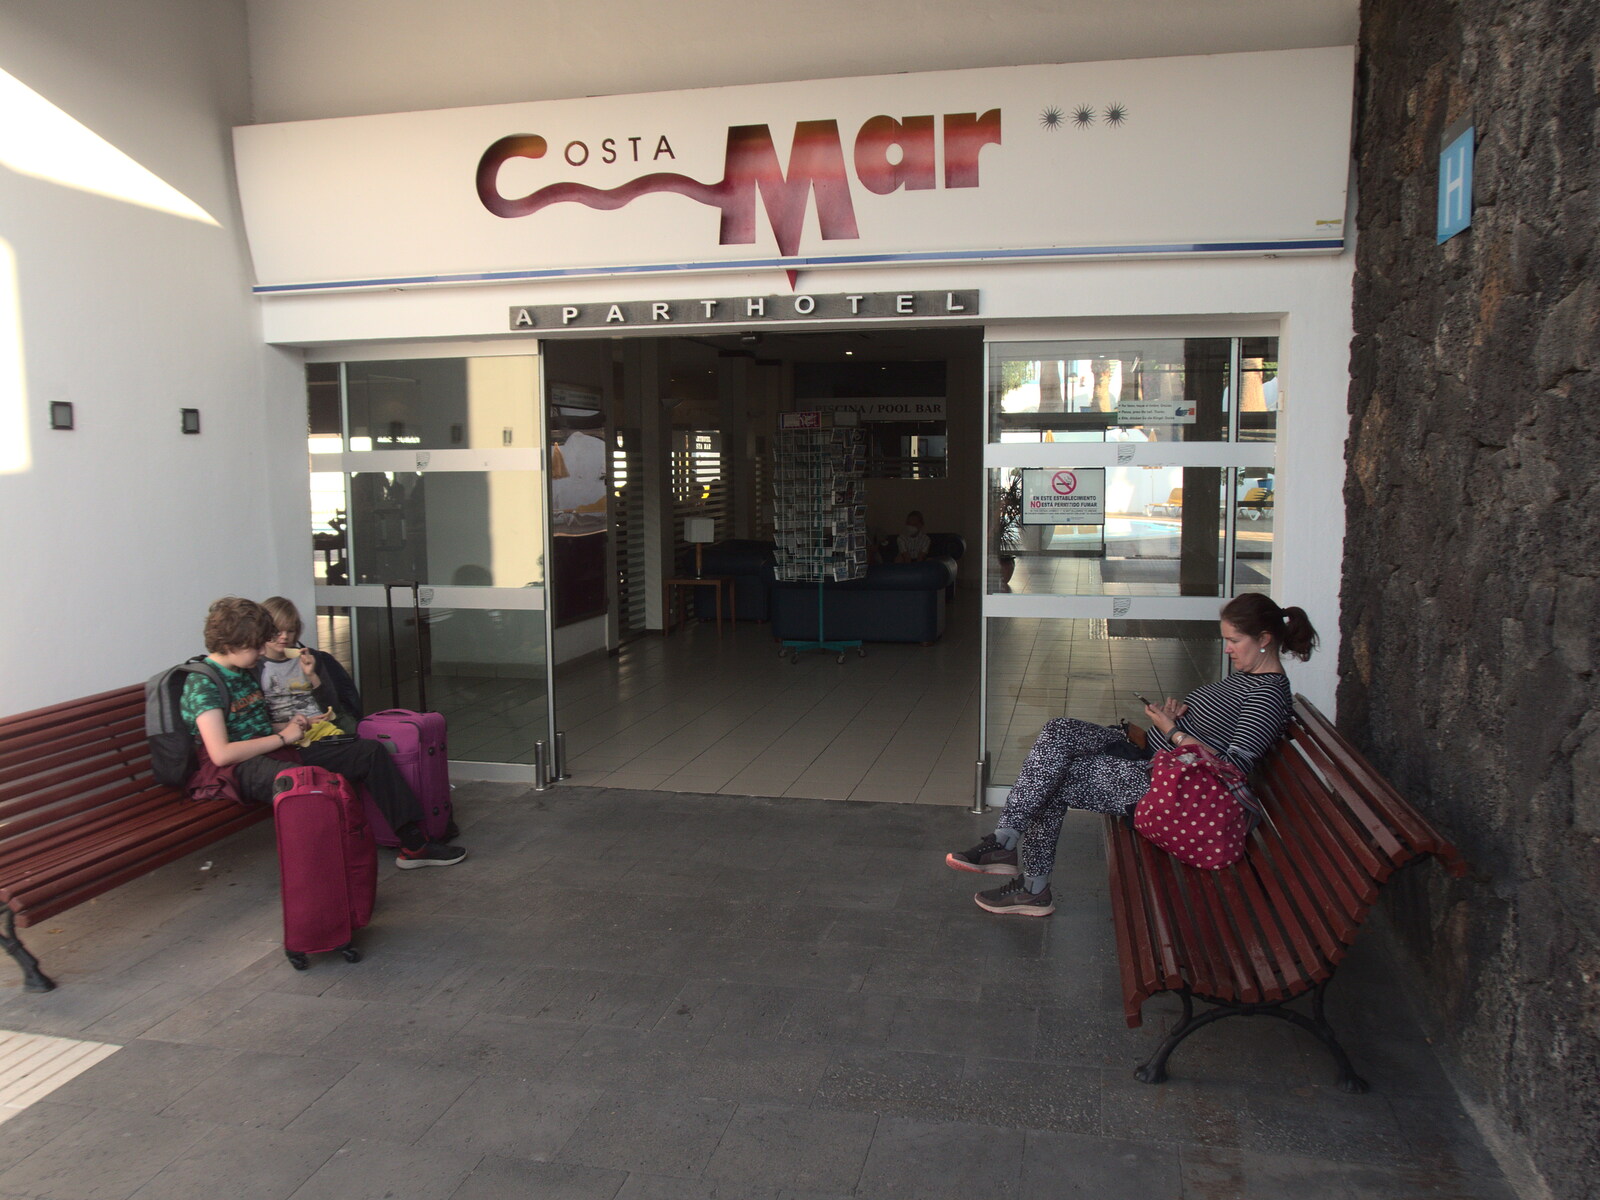 Waiting around outside Costa Mar Aparthotel from The Volcanoes of Lanzarote, Canary Islands, Spain - 27th October 2021